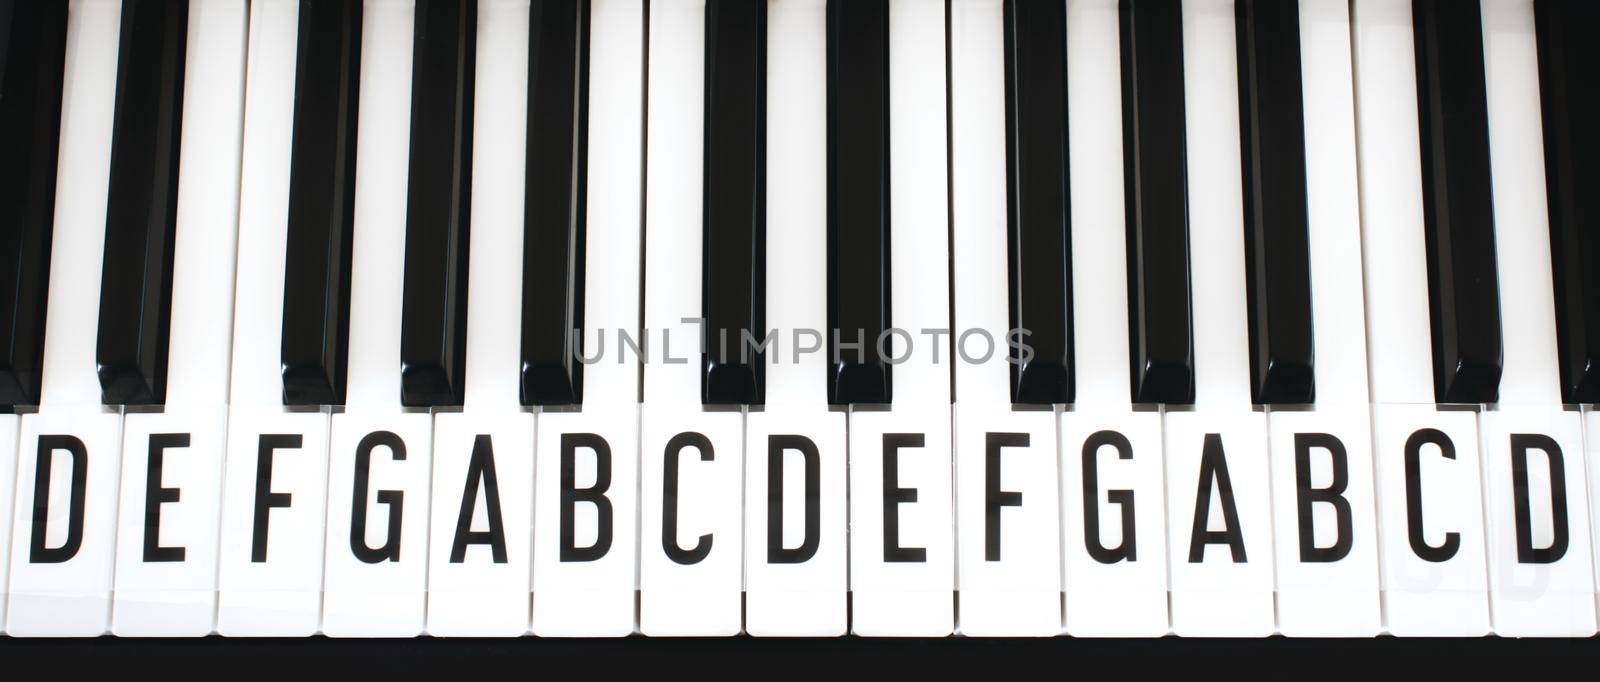 Top-down view of piano keyboard keys with letters of notes of the scale superimposed as a music cheat sheet for a new learner by tennesseewitney